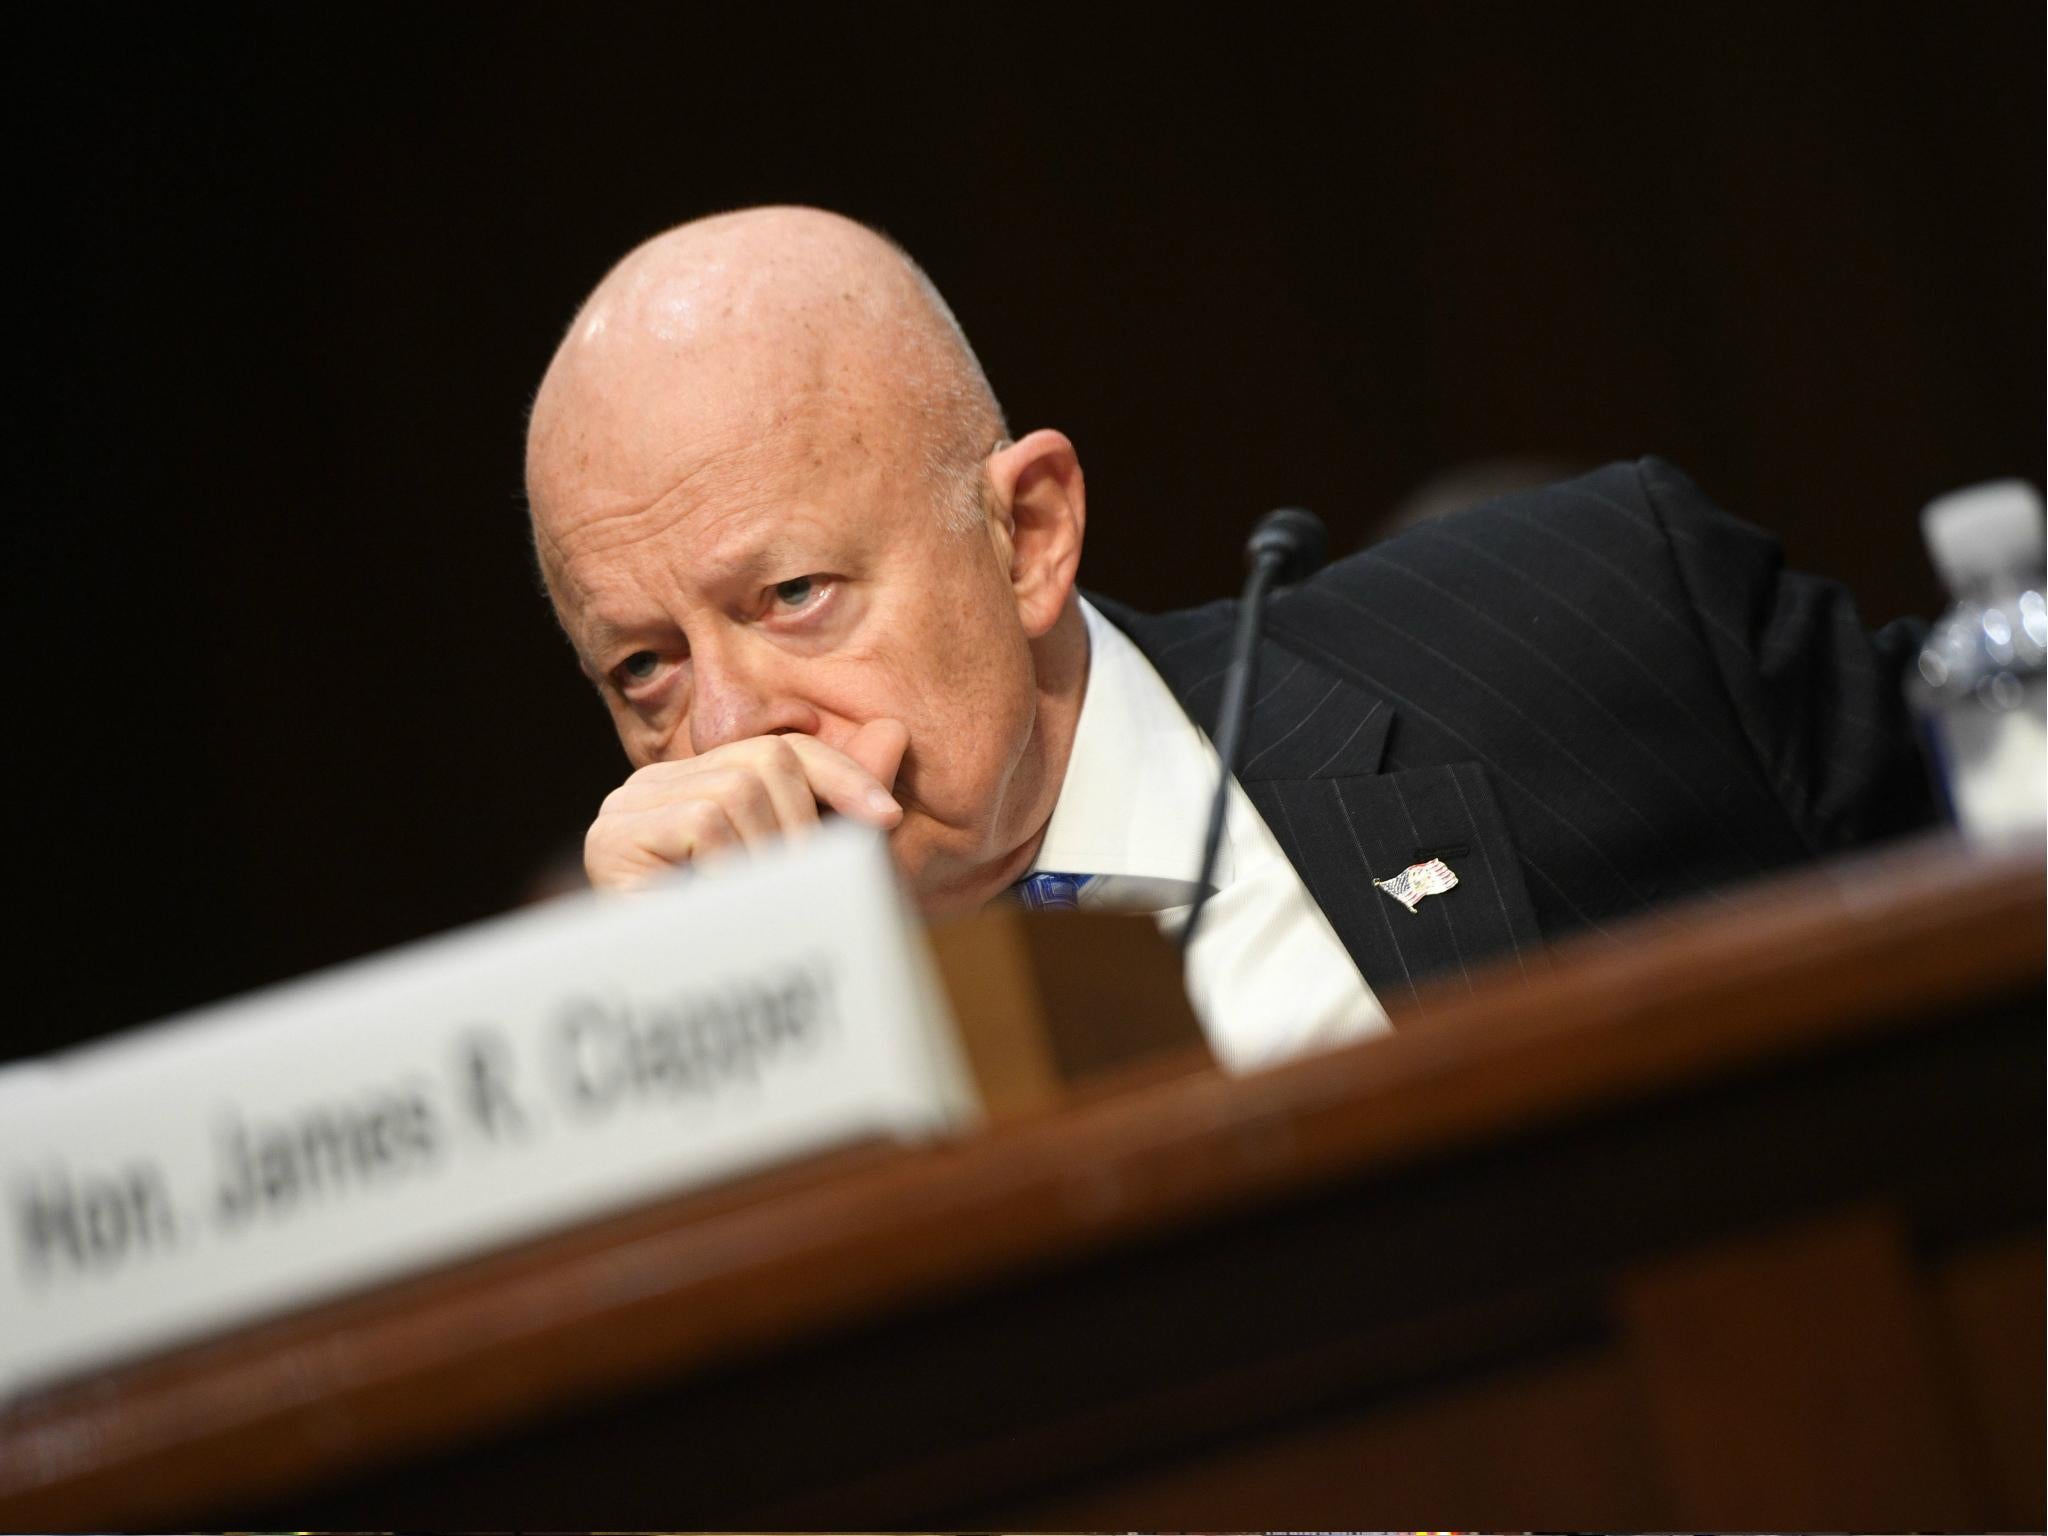 Former Director of National Intelligence James Clapper said US President Donald Trump downplaying Russian election hacking is a threat to national security